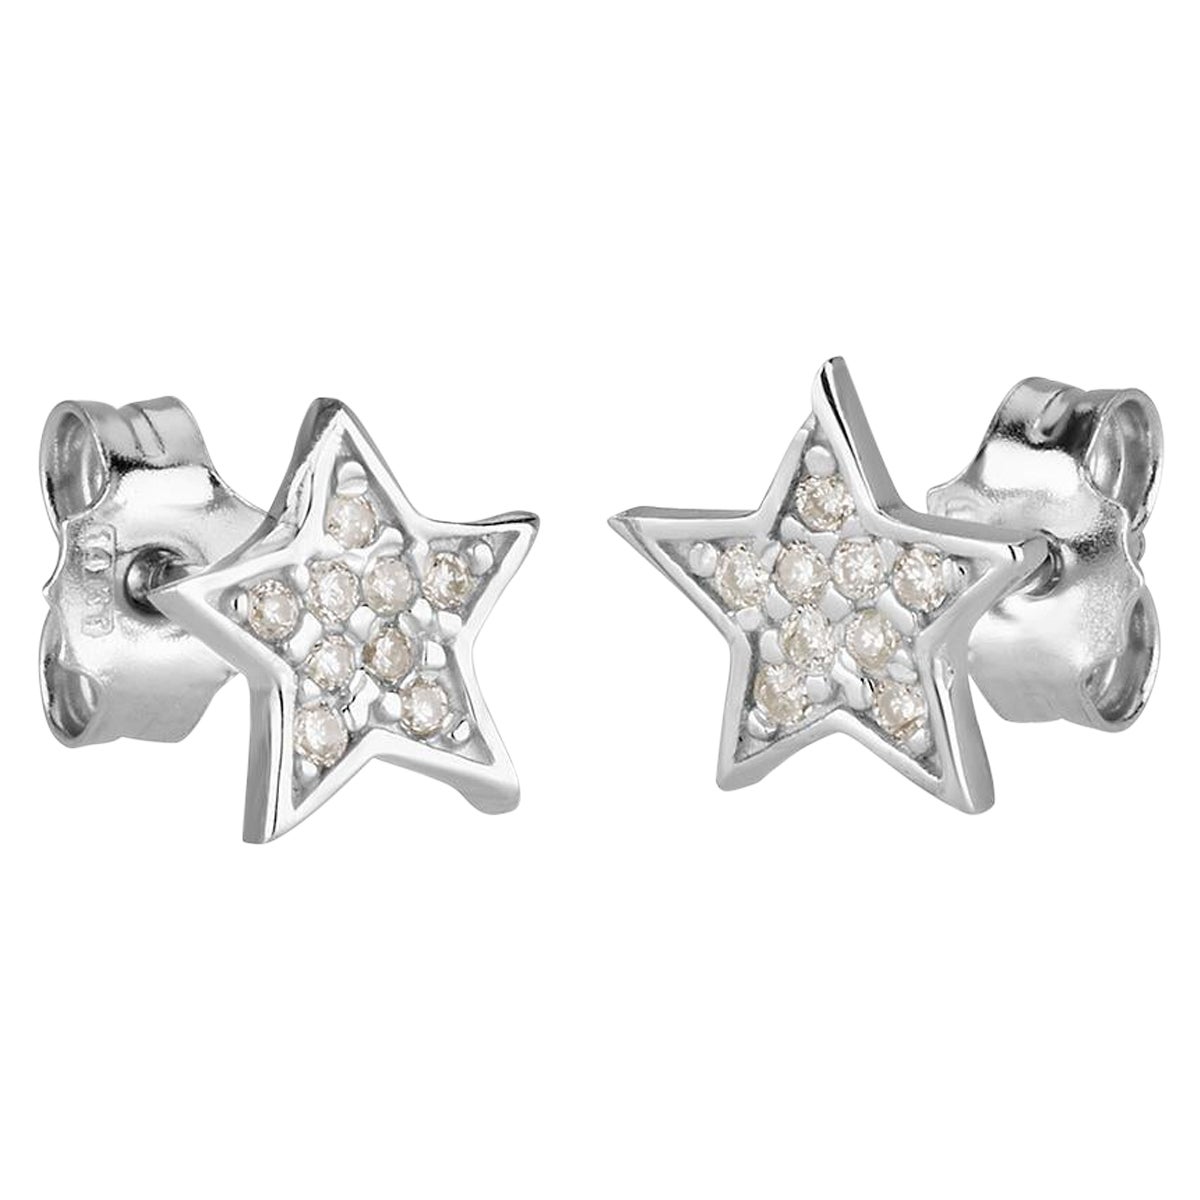 Hand-Crafted 14K White Gold Diamond Star Stud Earrings